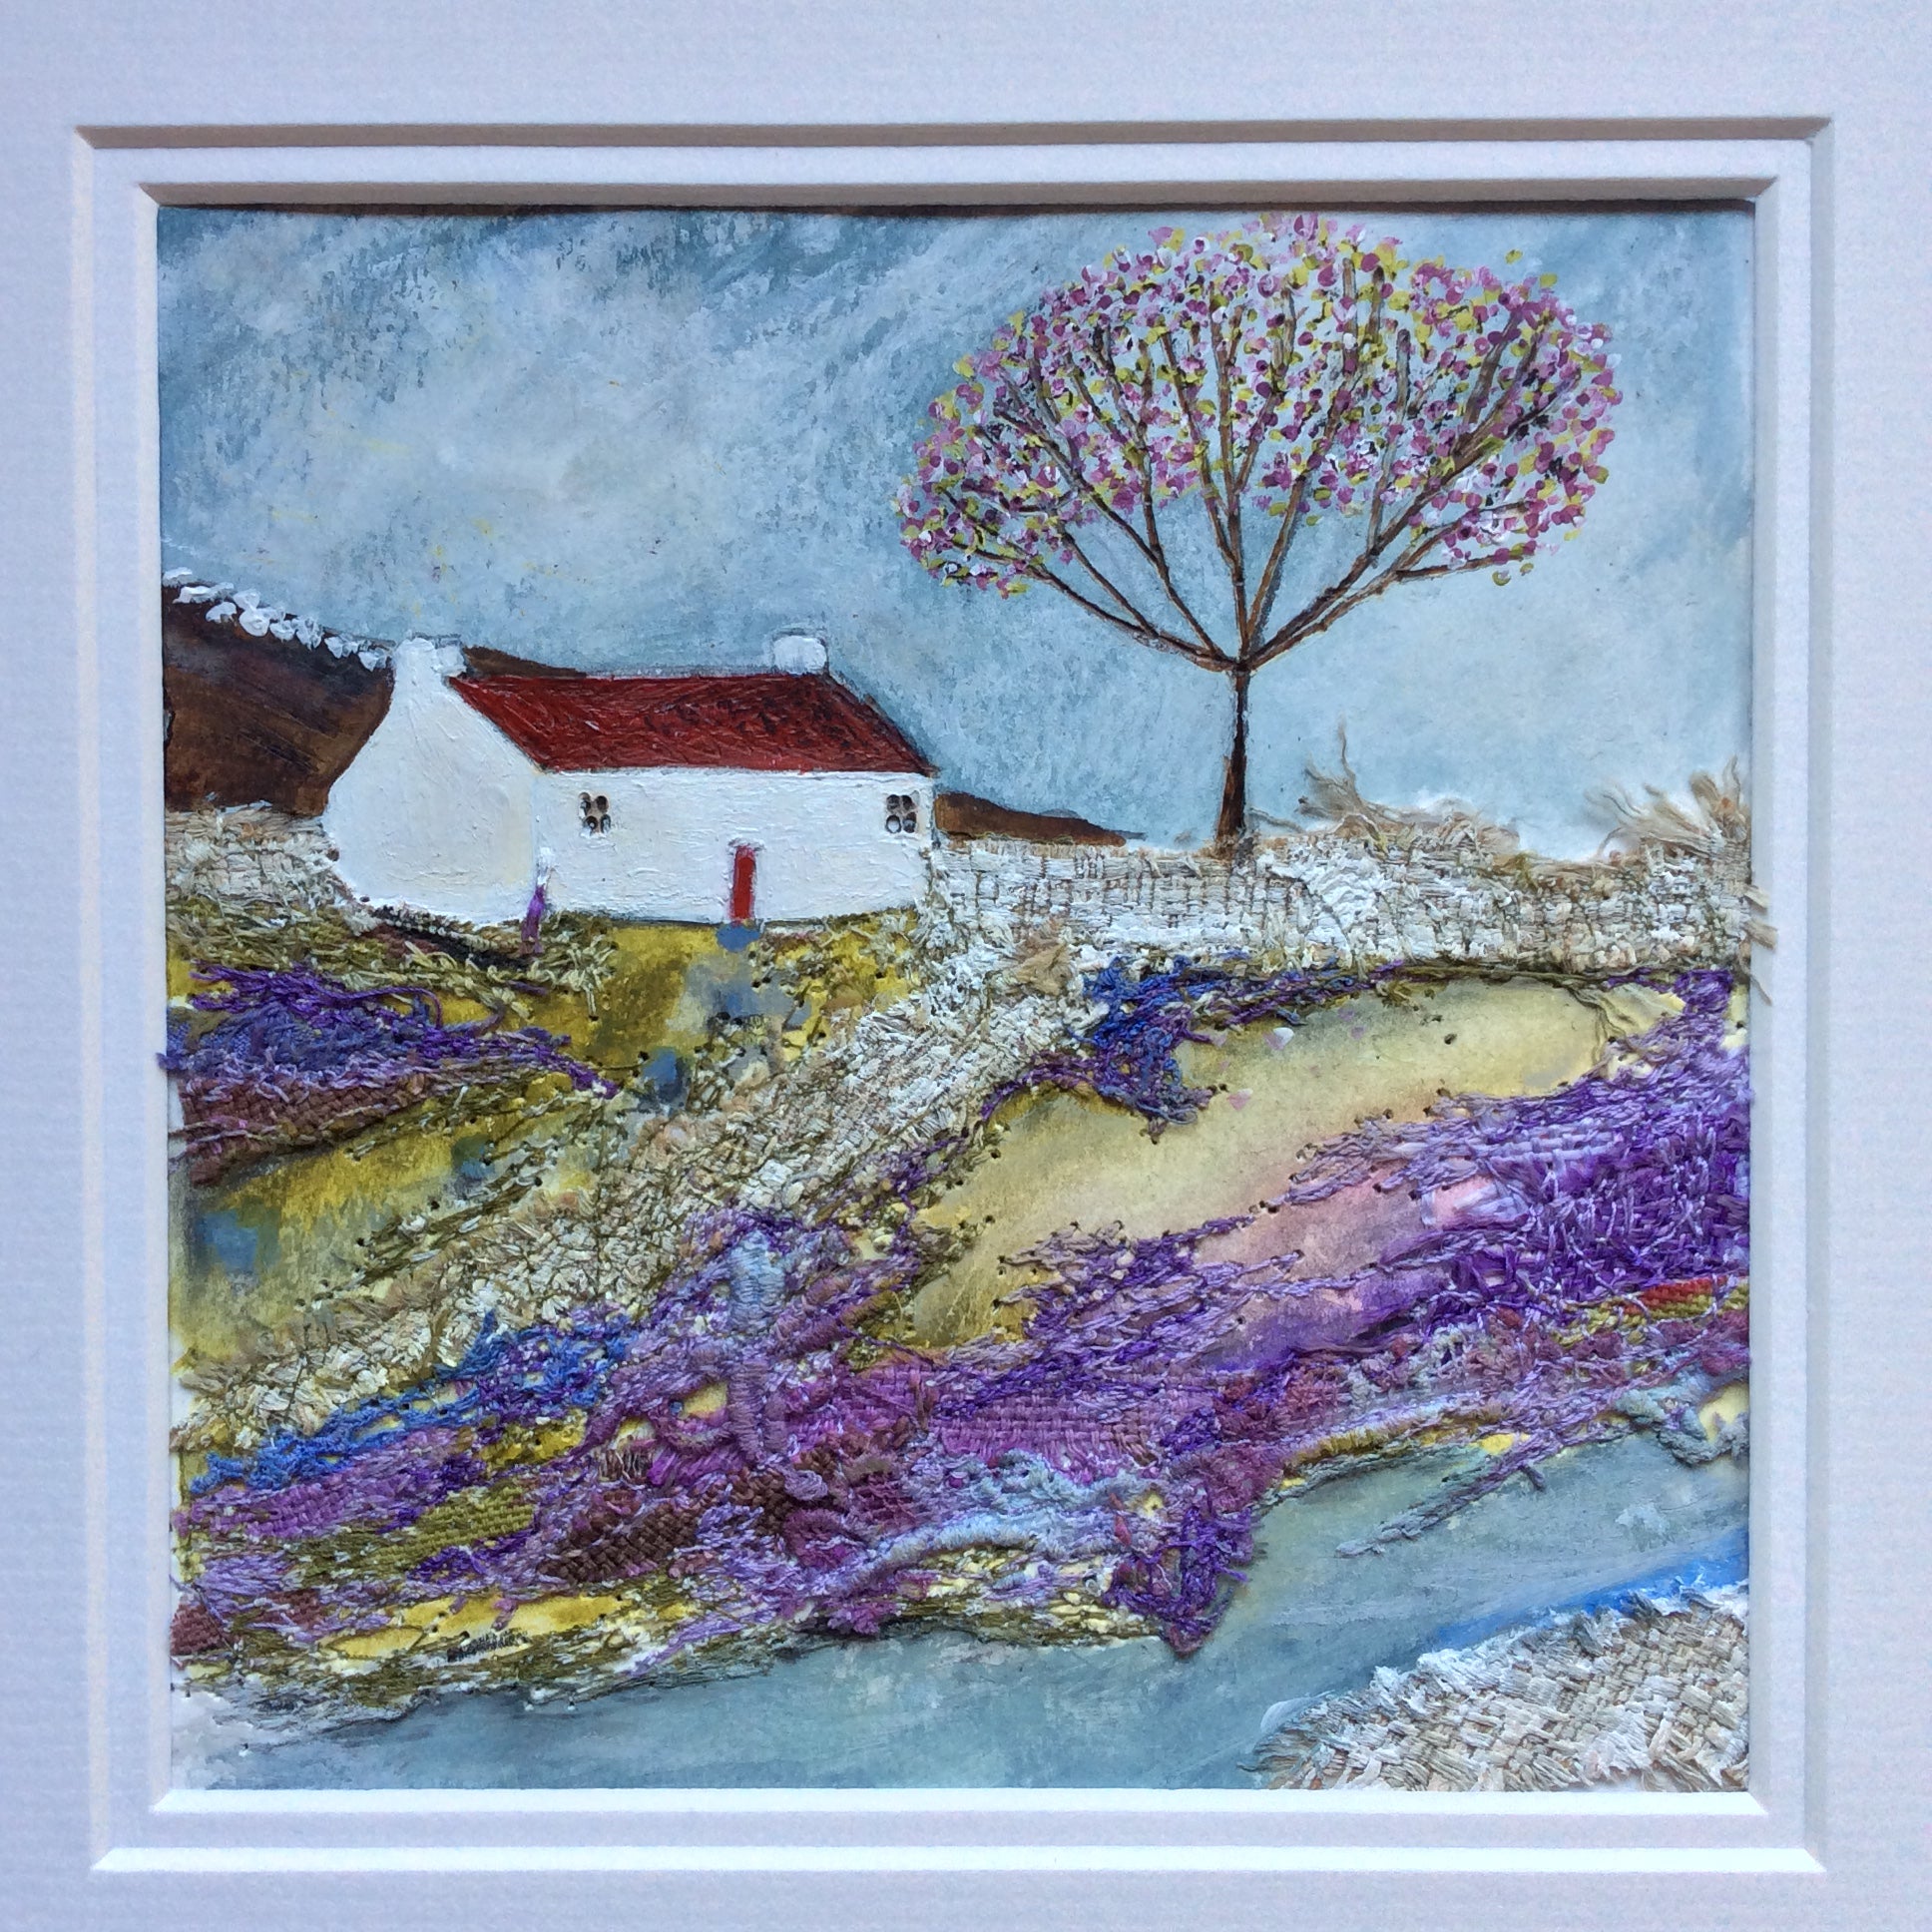 Mixed Media Art By Louise O'Hara - "Meadow View"